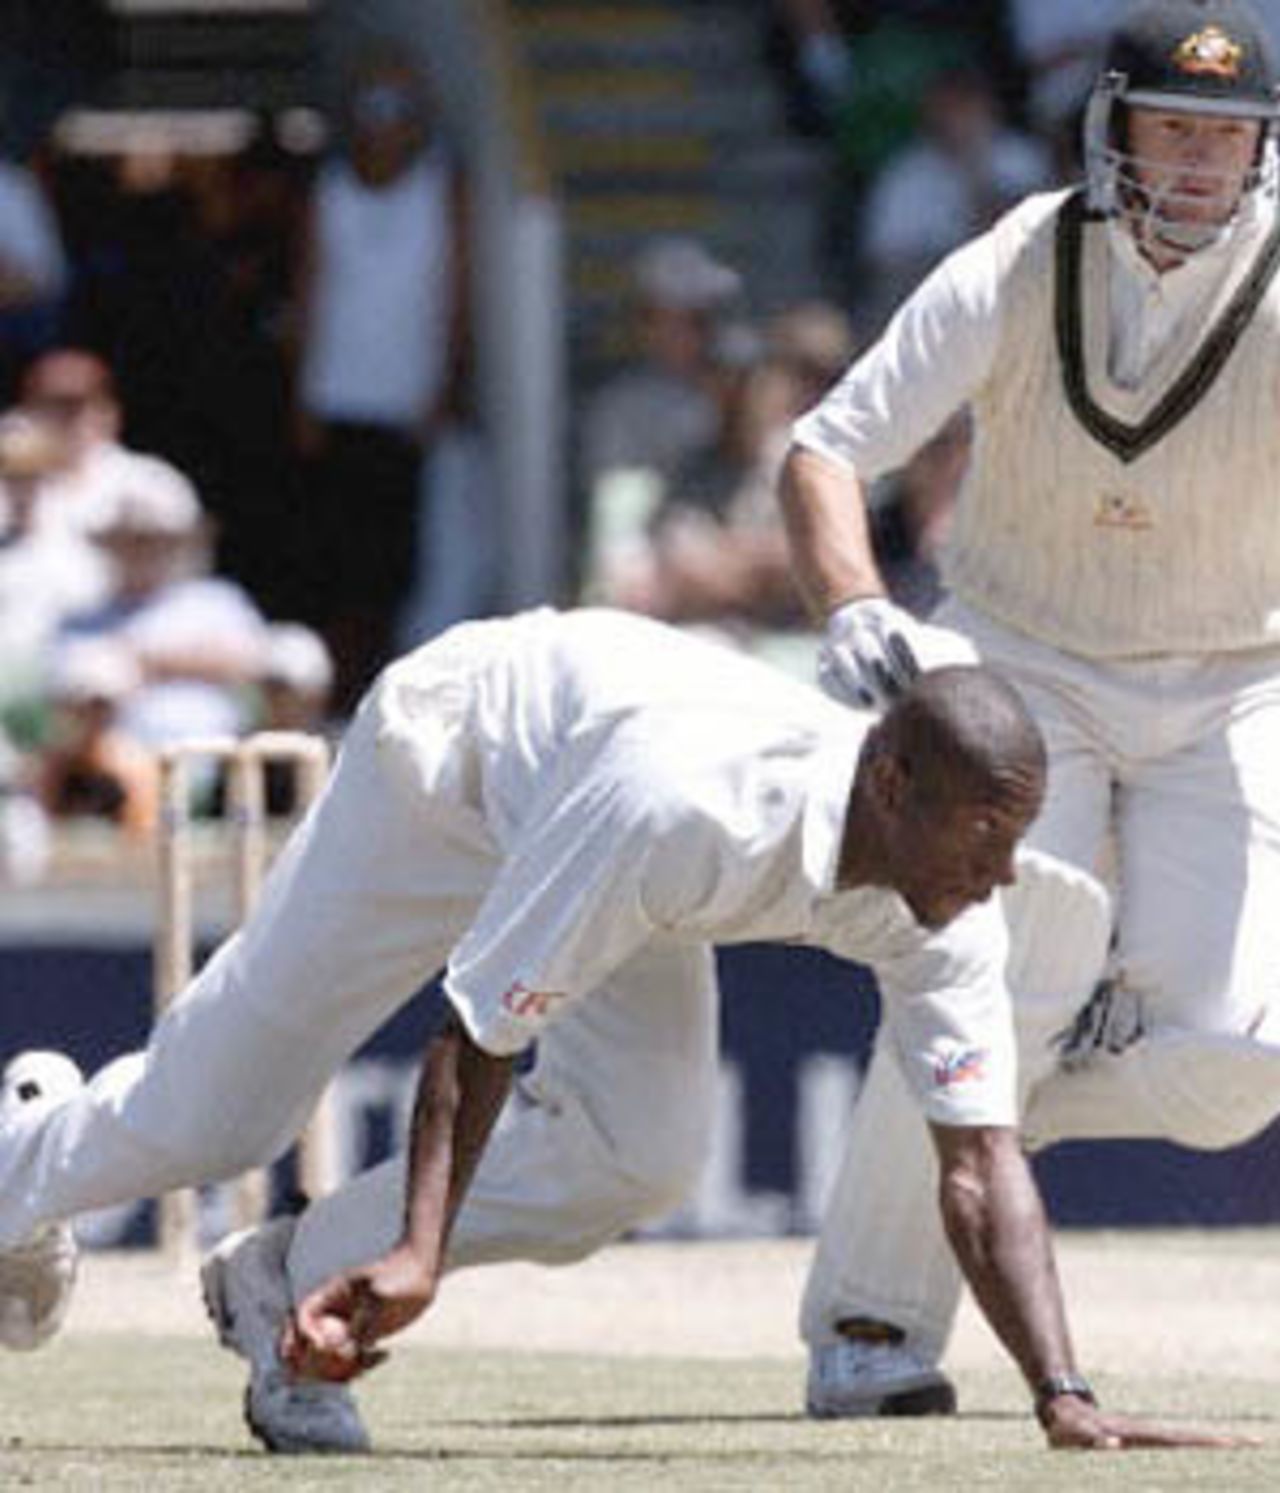 Nixon McLean attempts to run out Mark Waugh, The Frank Worrell Trophy, 2000/01, 2nd Test, Australia v West Indies, W.A.C.A. Ground, Perth, 01-05 December 2000 (Day 2).